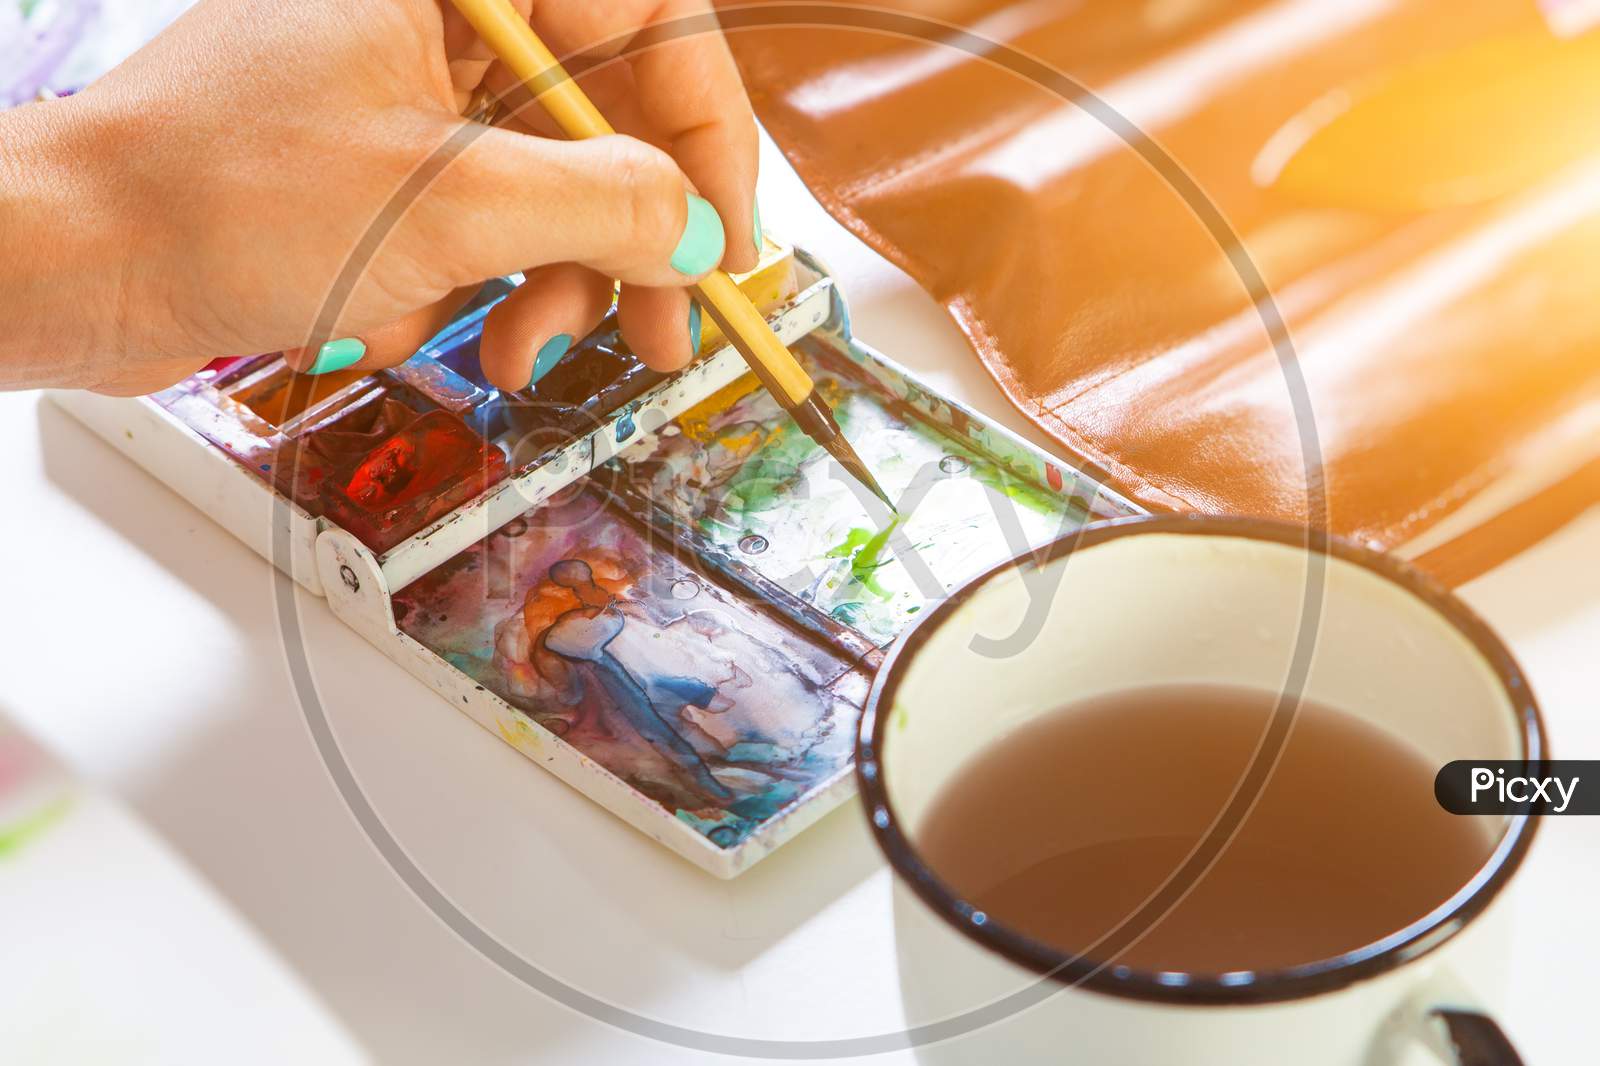 Close-Up Artist With Bright Nails Dabs A Brush In A Pallet With A Watercolor A Thin Wooden Brush, On The Table There Is A Leather Cover With Brushes And A Mug Of Water